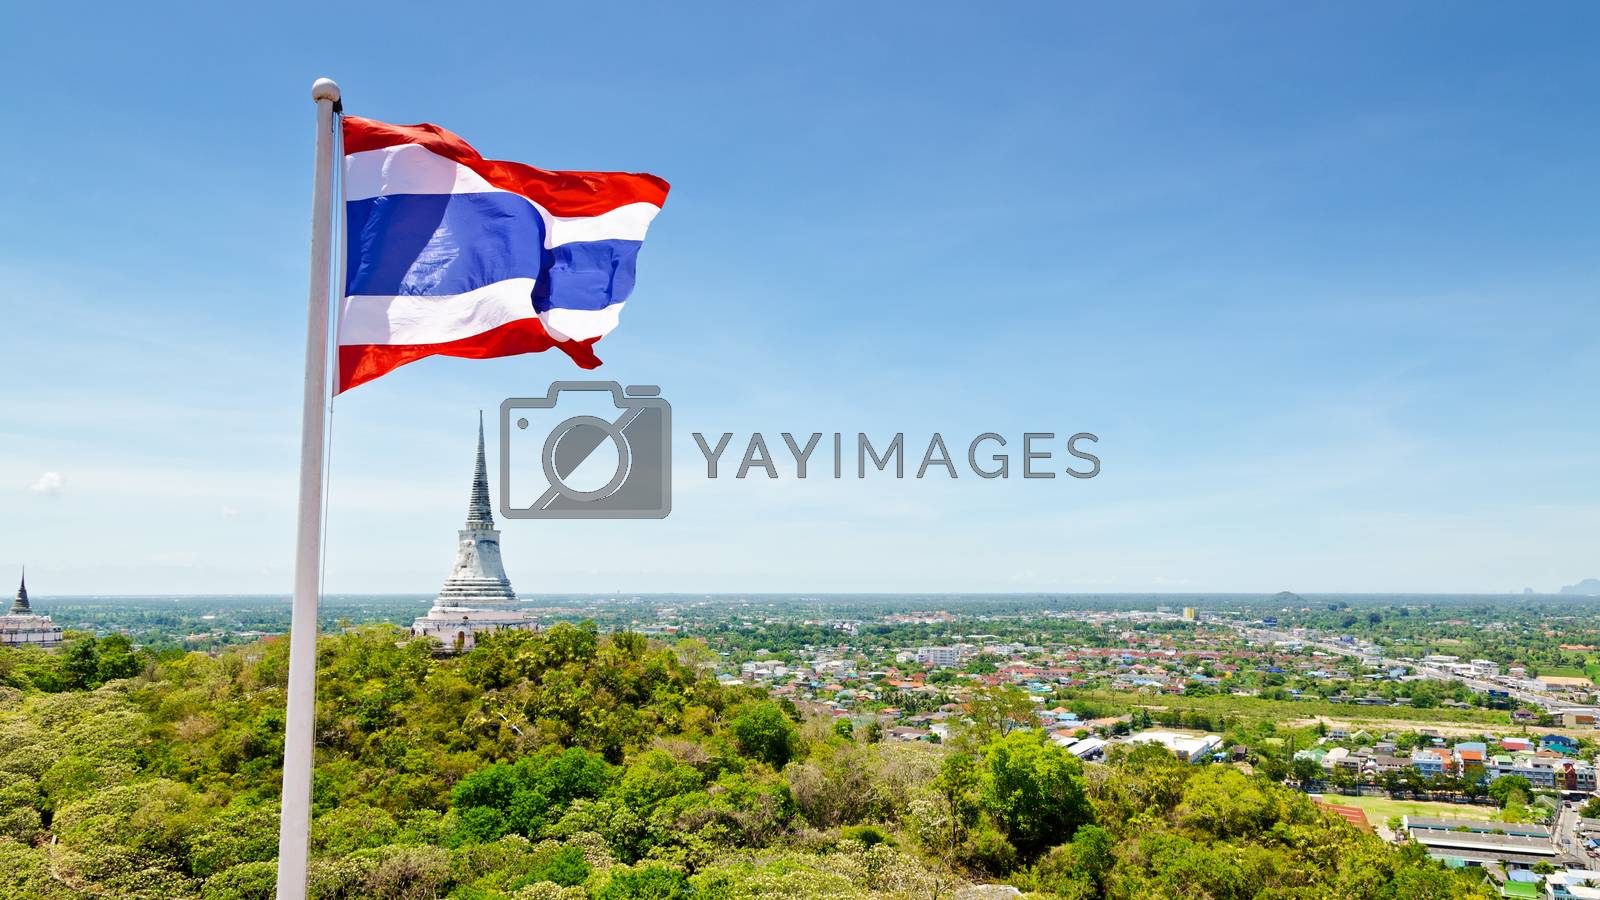 Royalty free image of Thai flag waving in the wind by Yongkiet